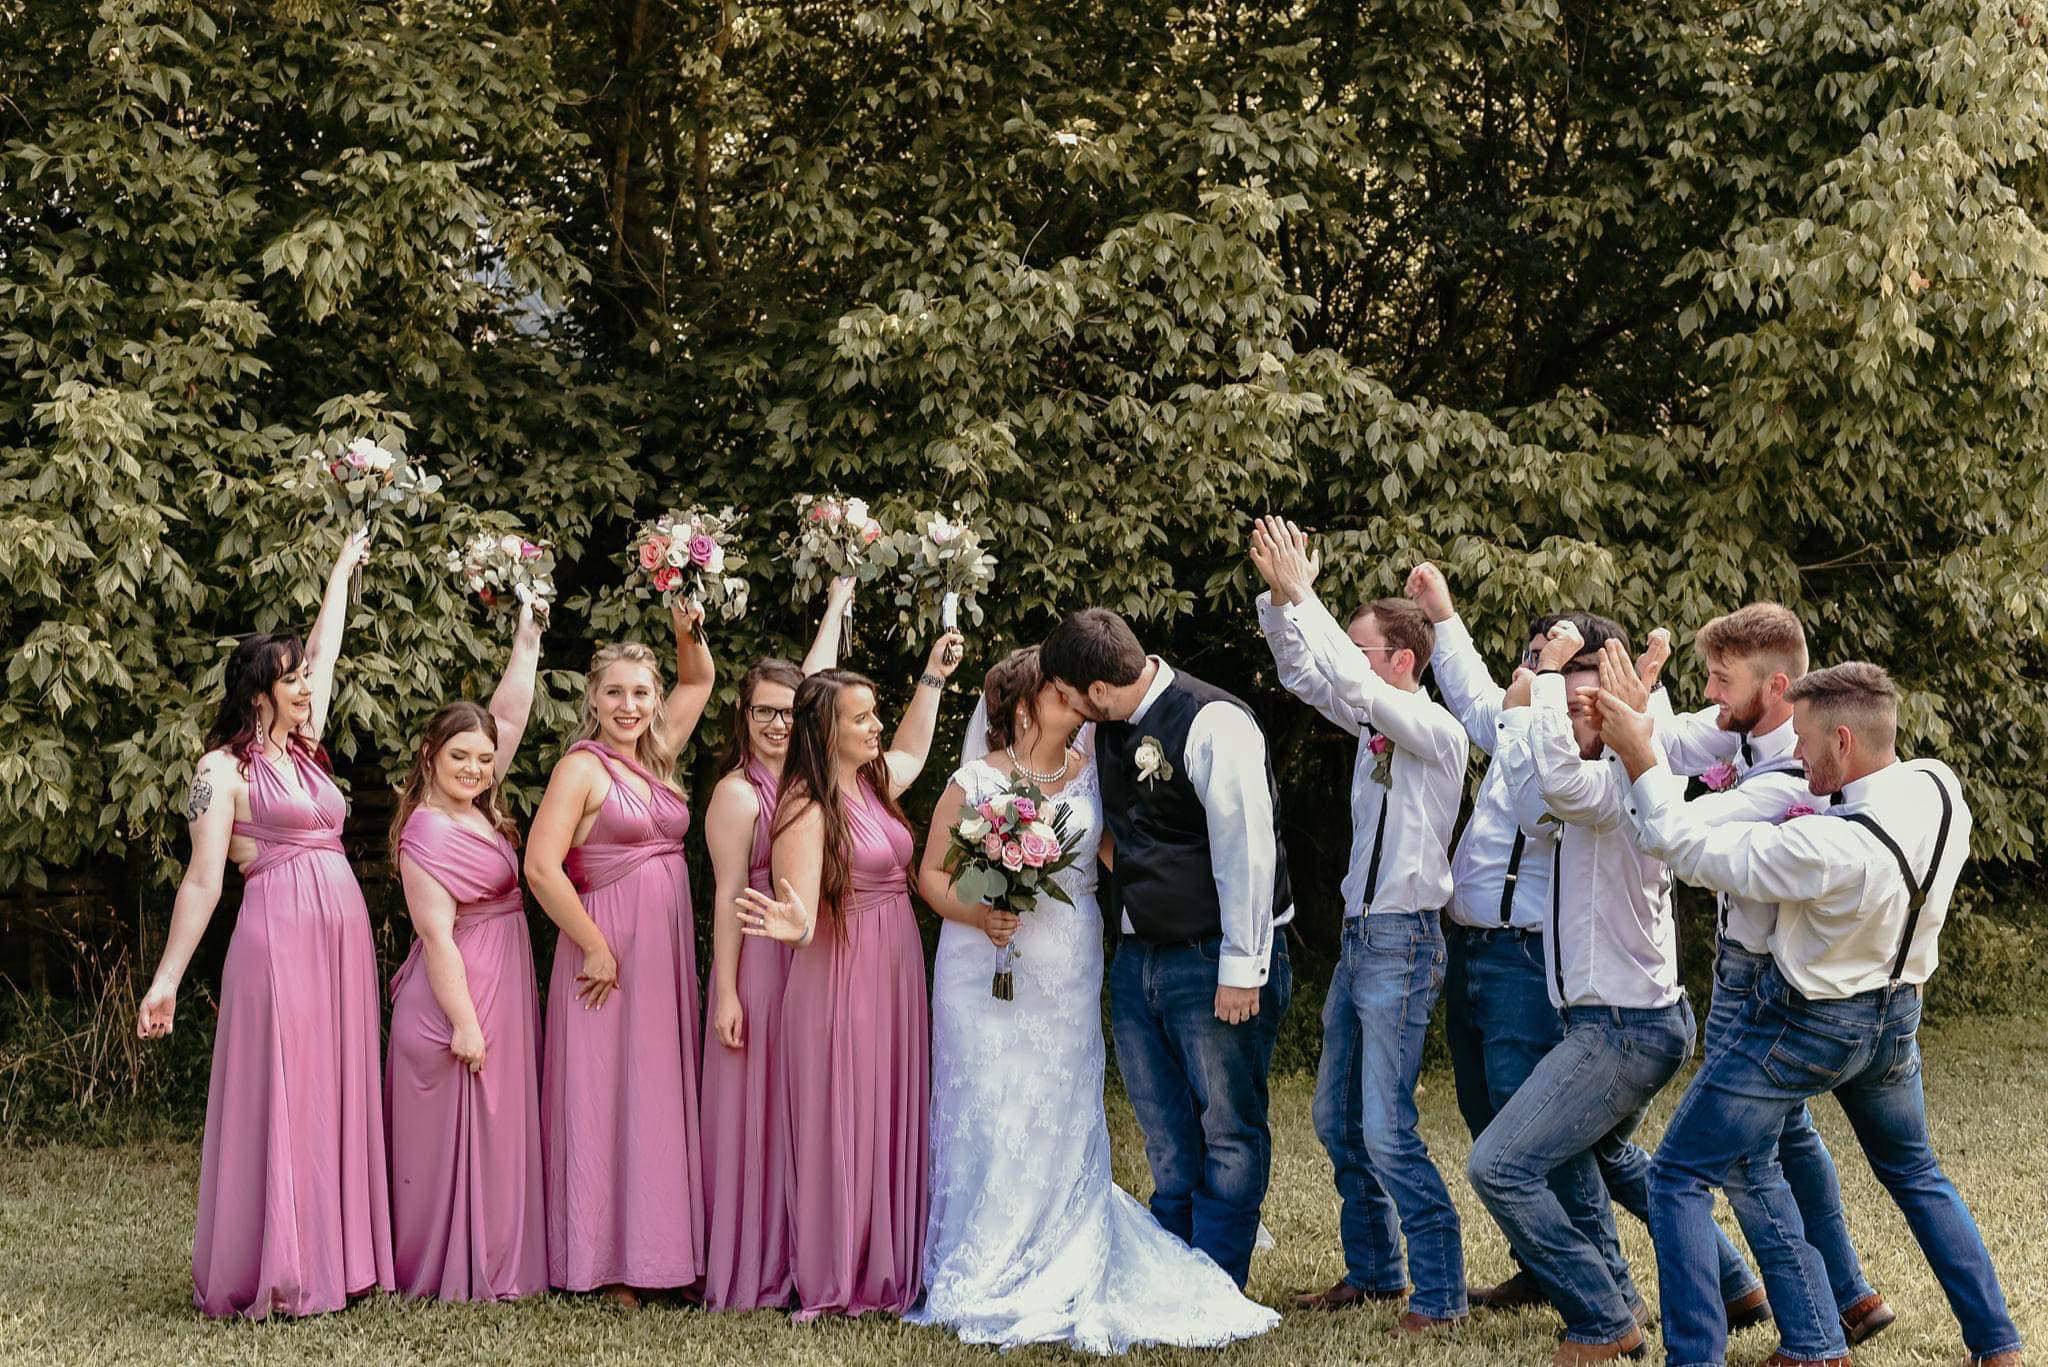 The bridal party for Jessica and Caydan Ferrell